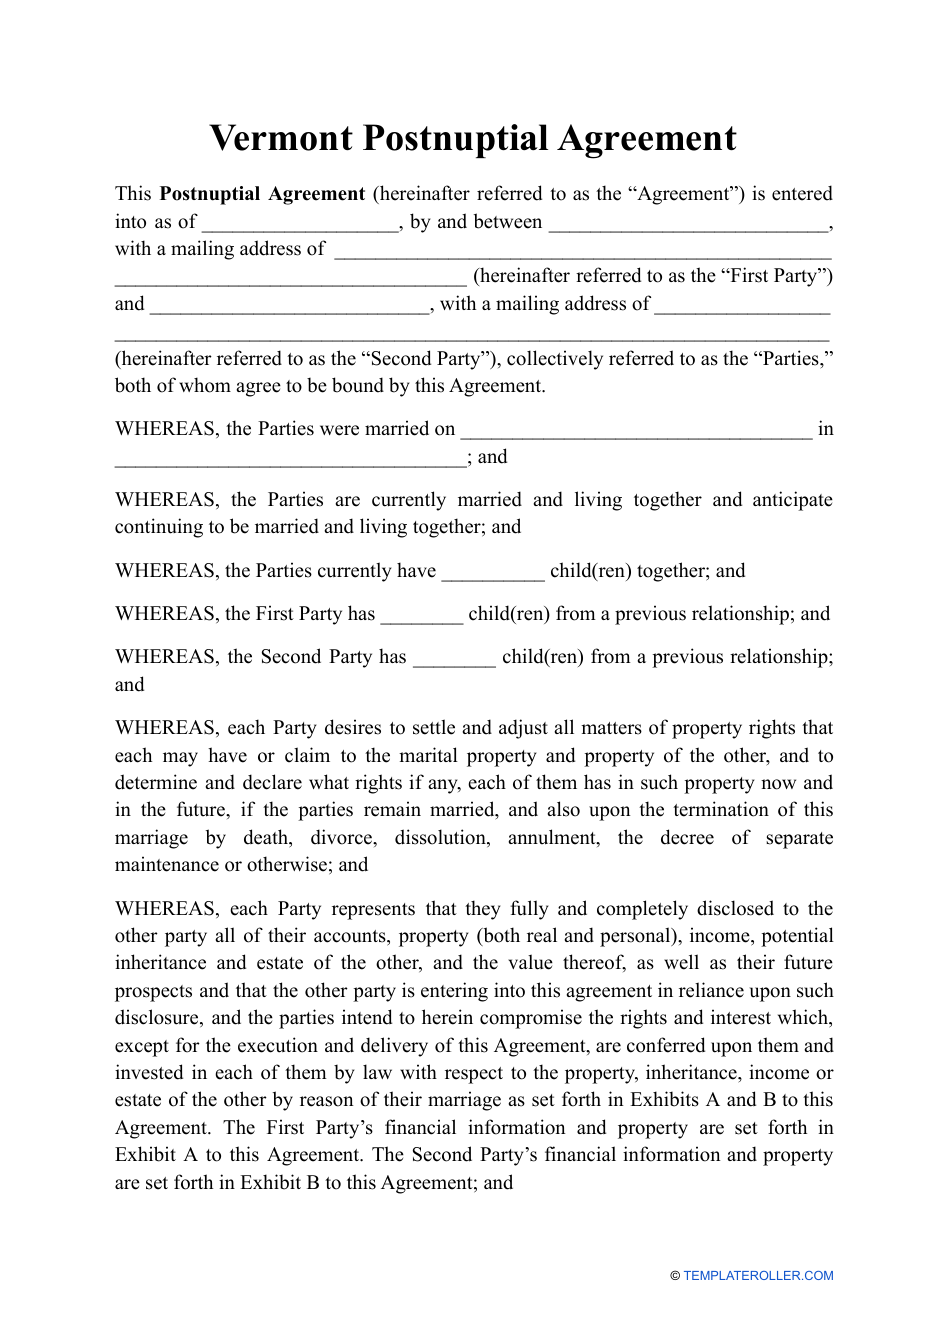 Postnuptial Agreement Template - Vermont, Page 1